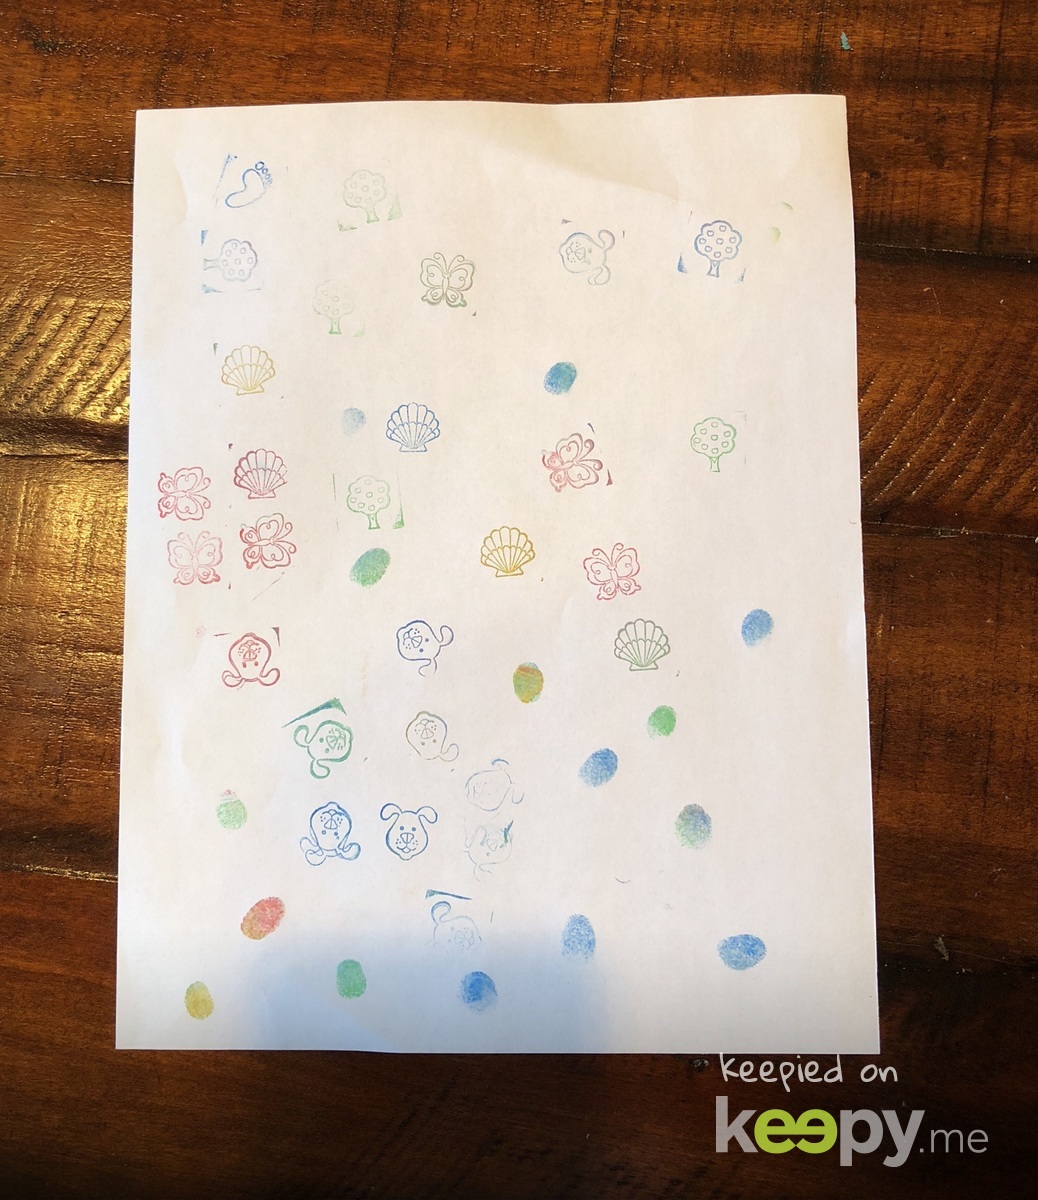 I was away for Rara’s baby shower and Kenzie was excited to show me what she made for me when I got home. Those are her little fingerprints.  What a smile it put on my face! » Keepy.me